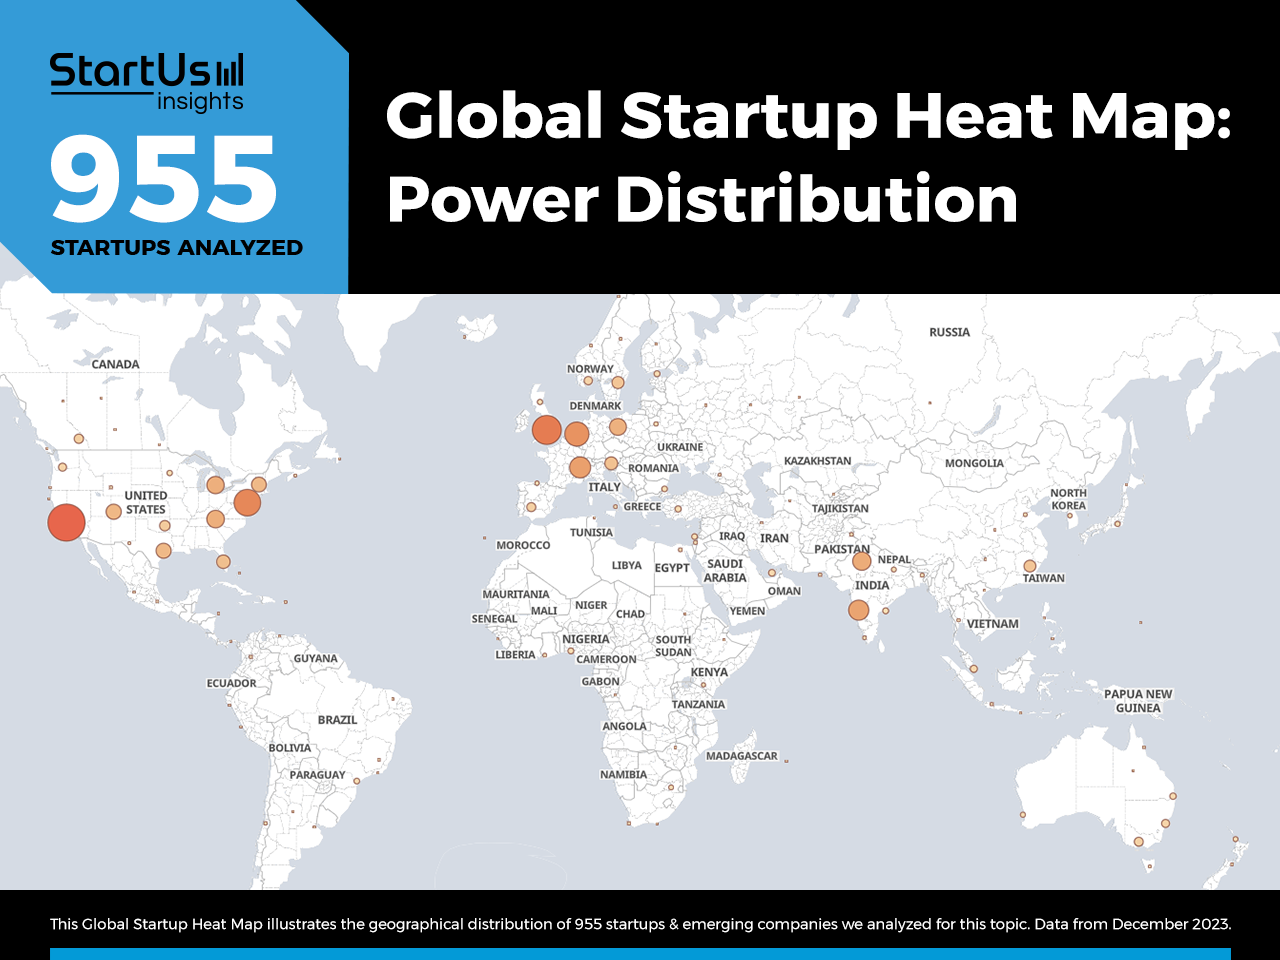 Power-Distribution-Startups-TrendResearch-Heat-Map-StartUs-Insights-noresize